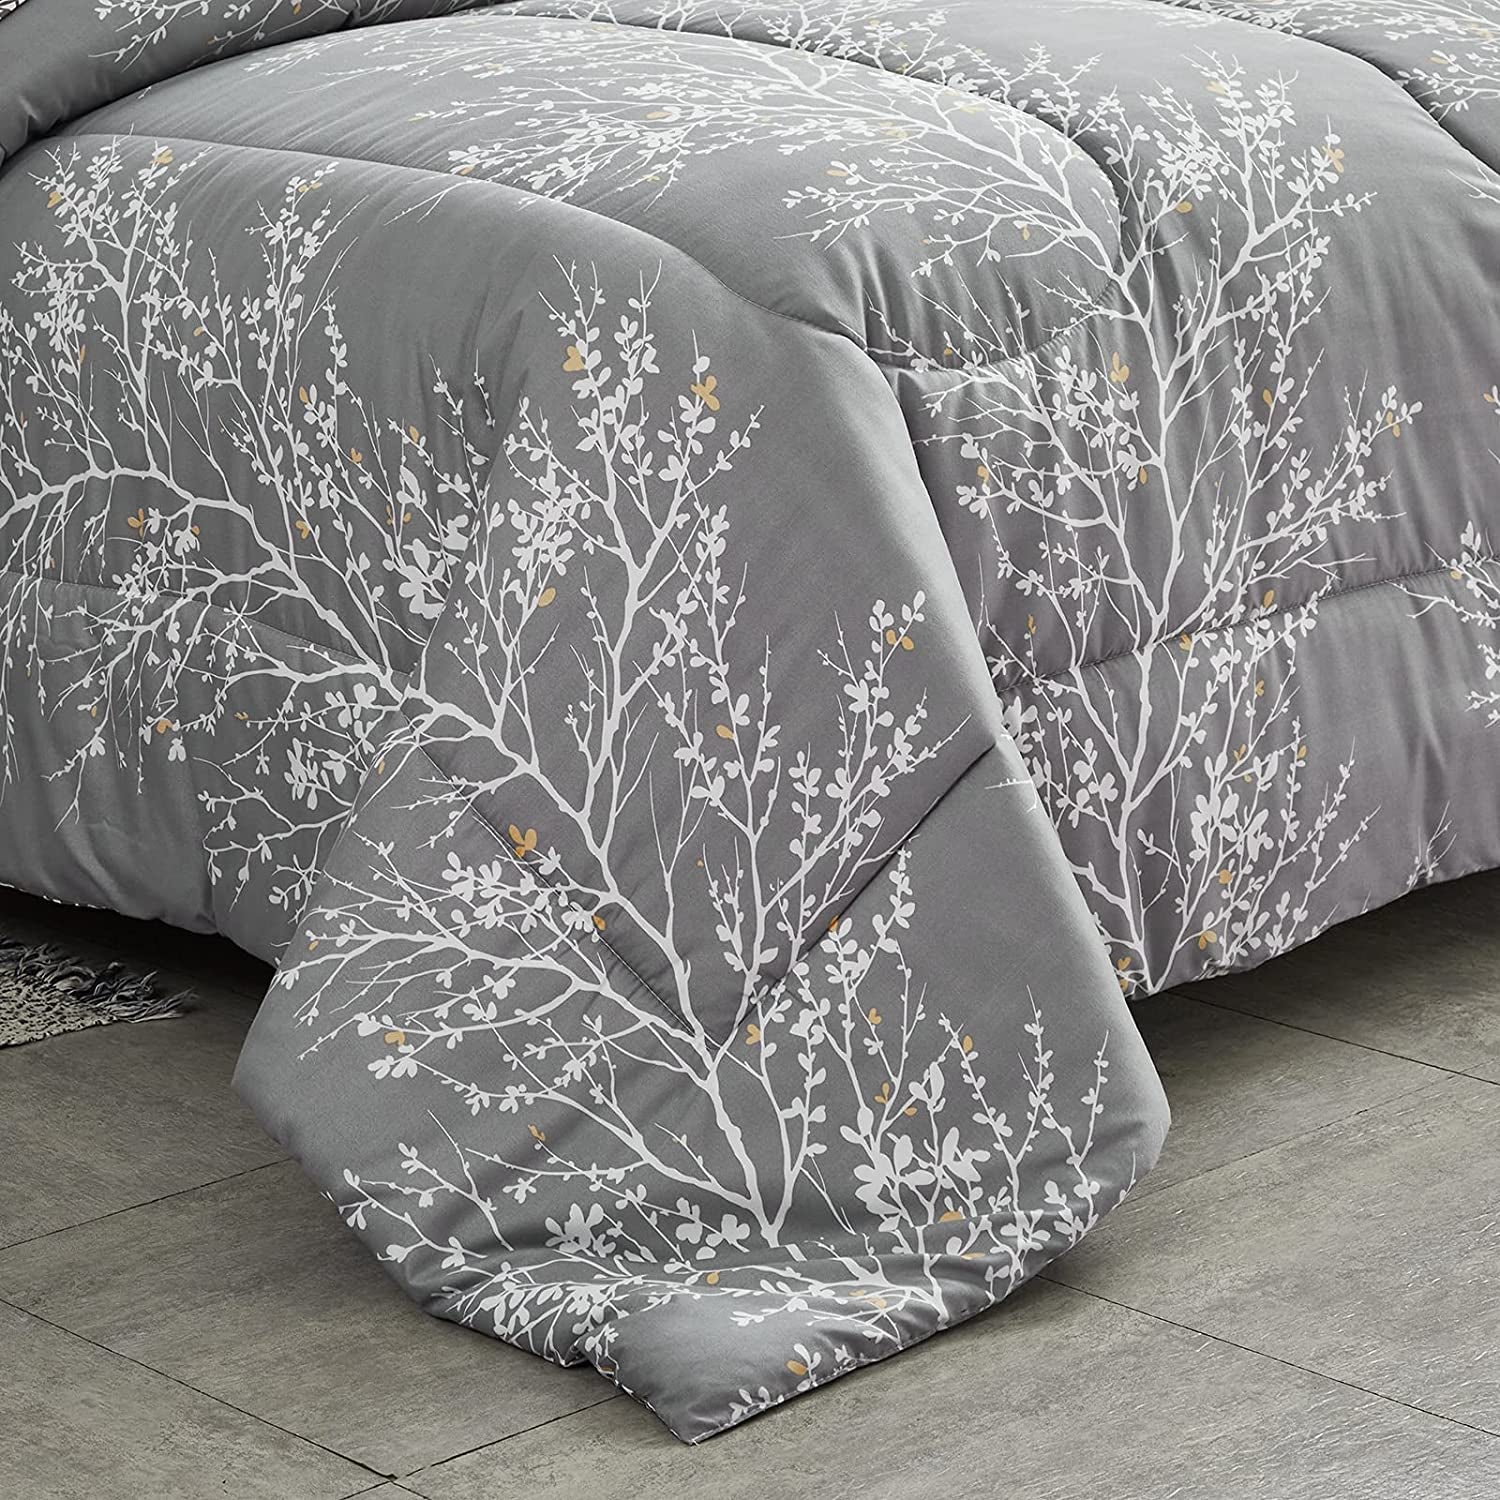 Bed in a Bag 7 Pieces Queen Size Gray Branches with Yellow Dots - Soft Microfiber Reversible Bed Comforter Set (1 Comforter 2 Pillow Shams 1 Flat Sheet 1 Fitted Sheet 2 Pillowcases)